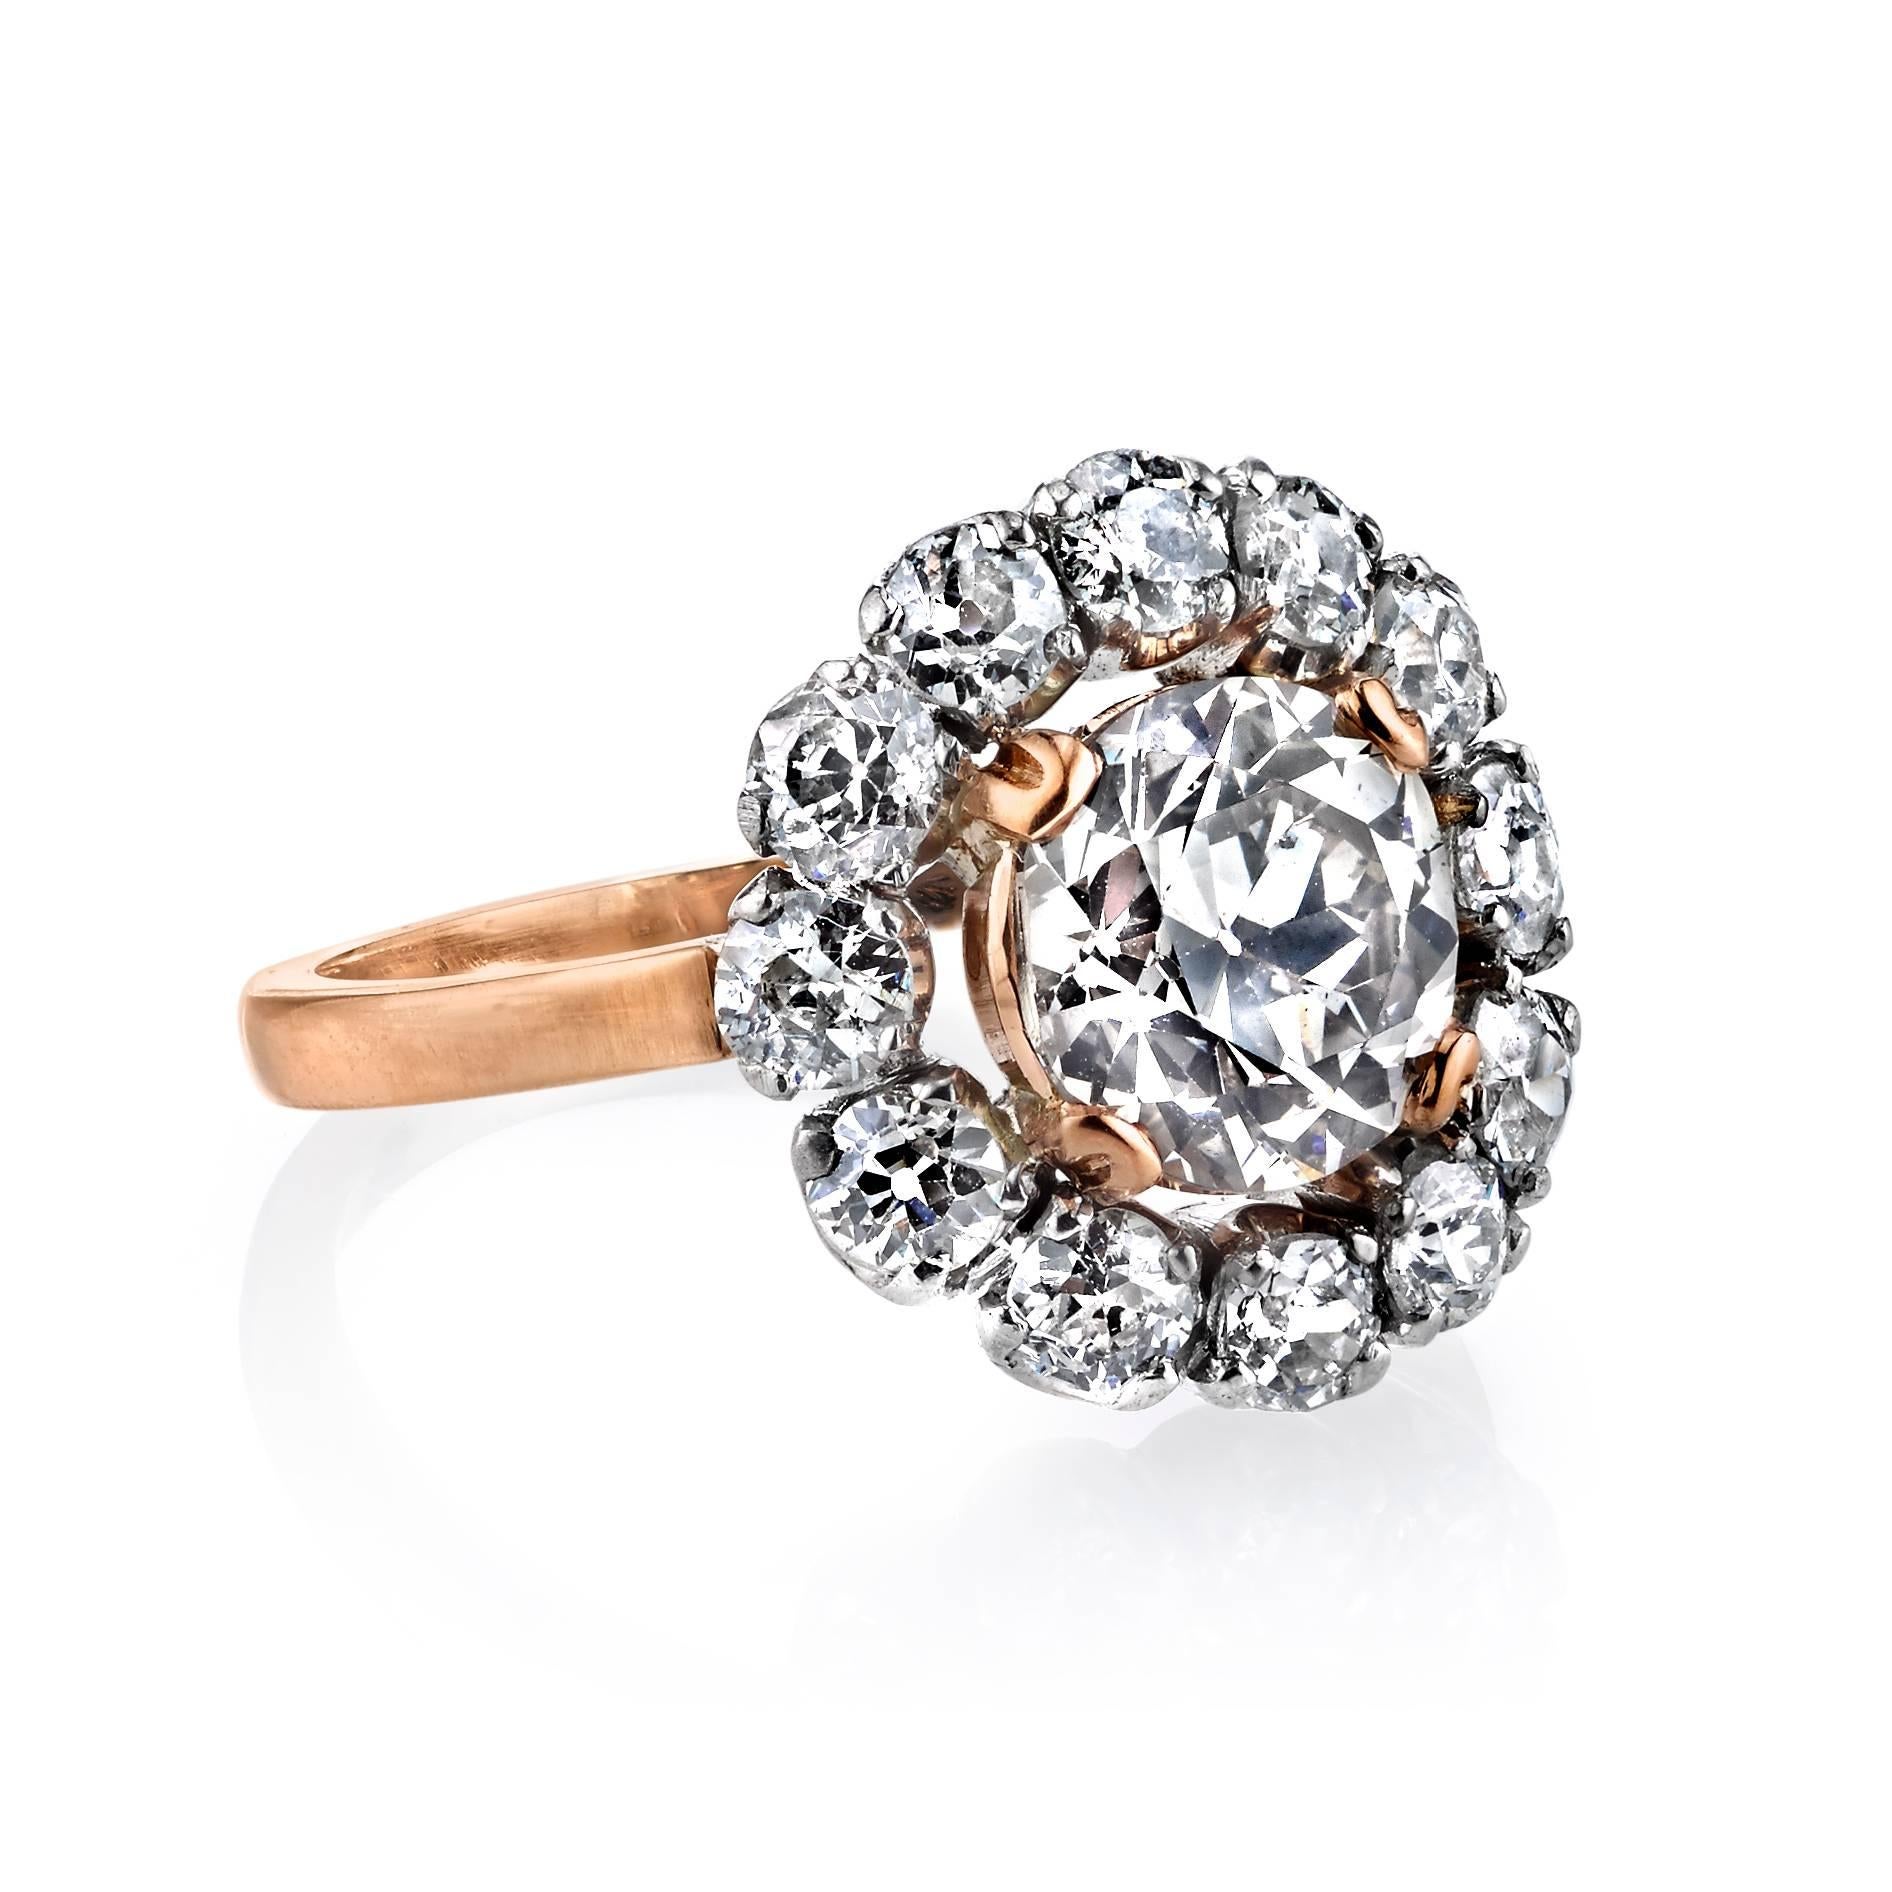 2.12ct Rose Brown/ SI1 old Mine cut diamond with 1.10ctw surround diamonds set in a vintage 18k Rose gold and platinum mounting. Circa 1920. A beautiful two tone cluster ring.